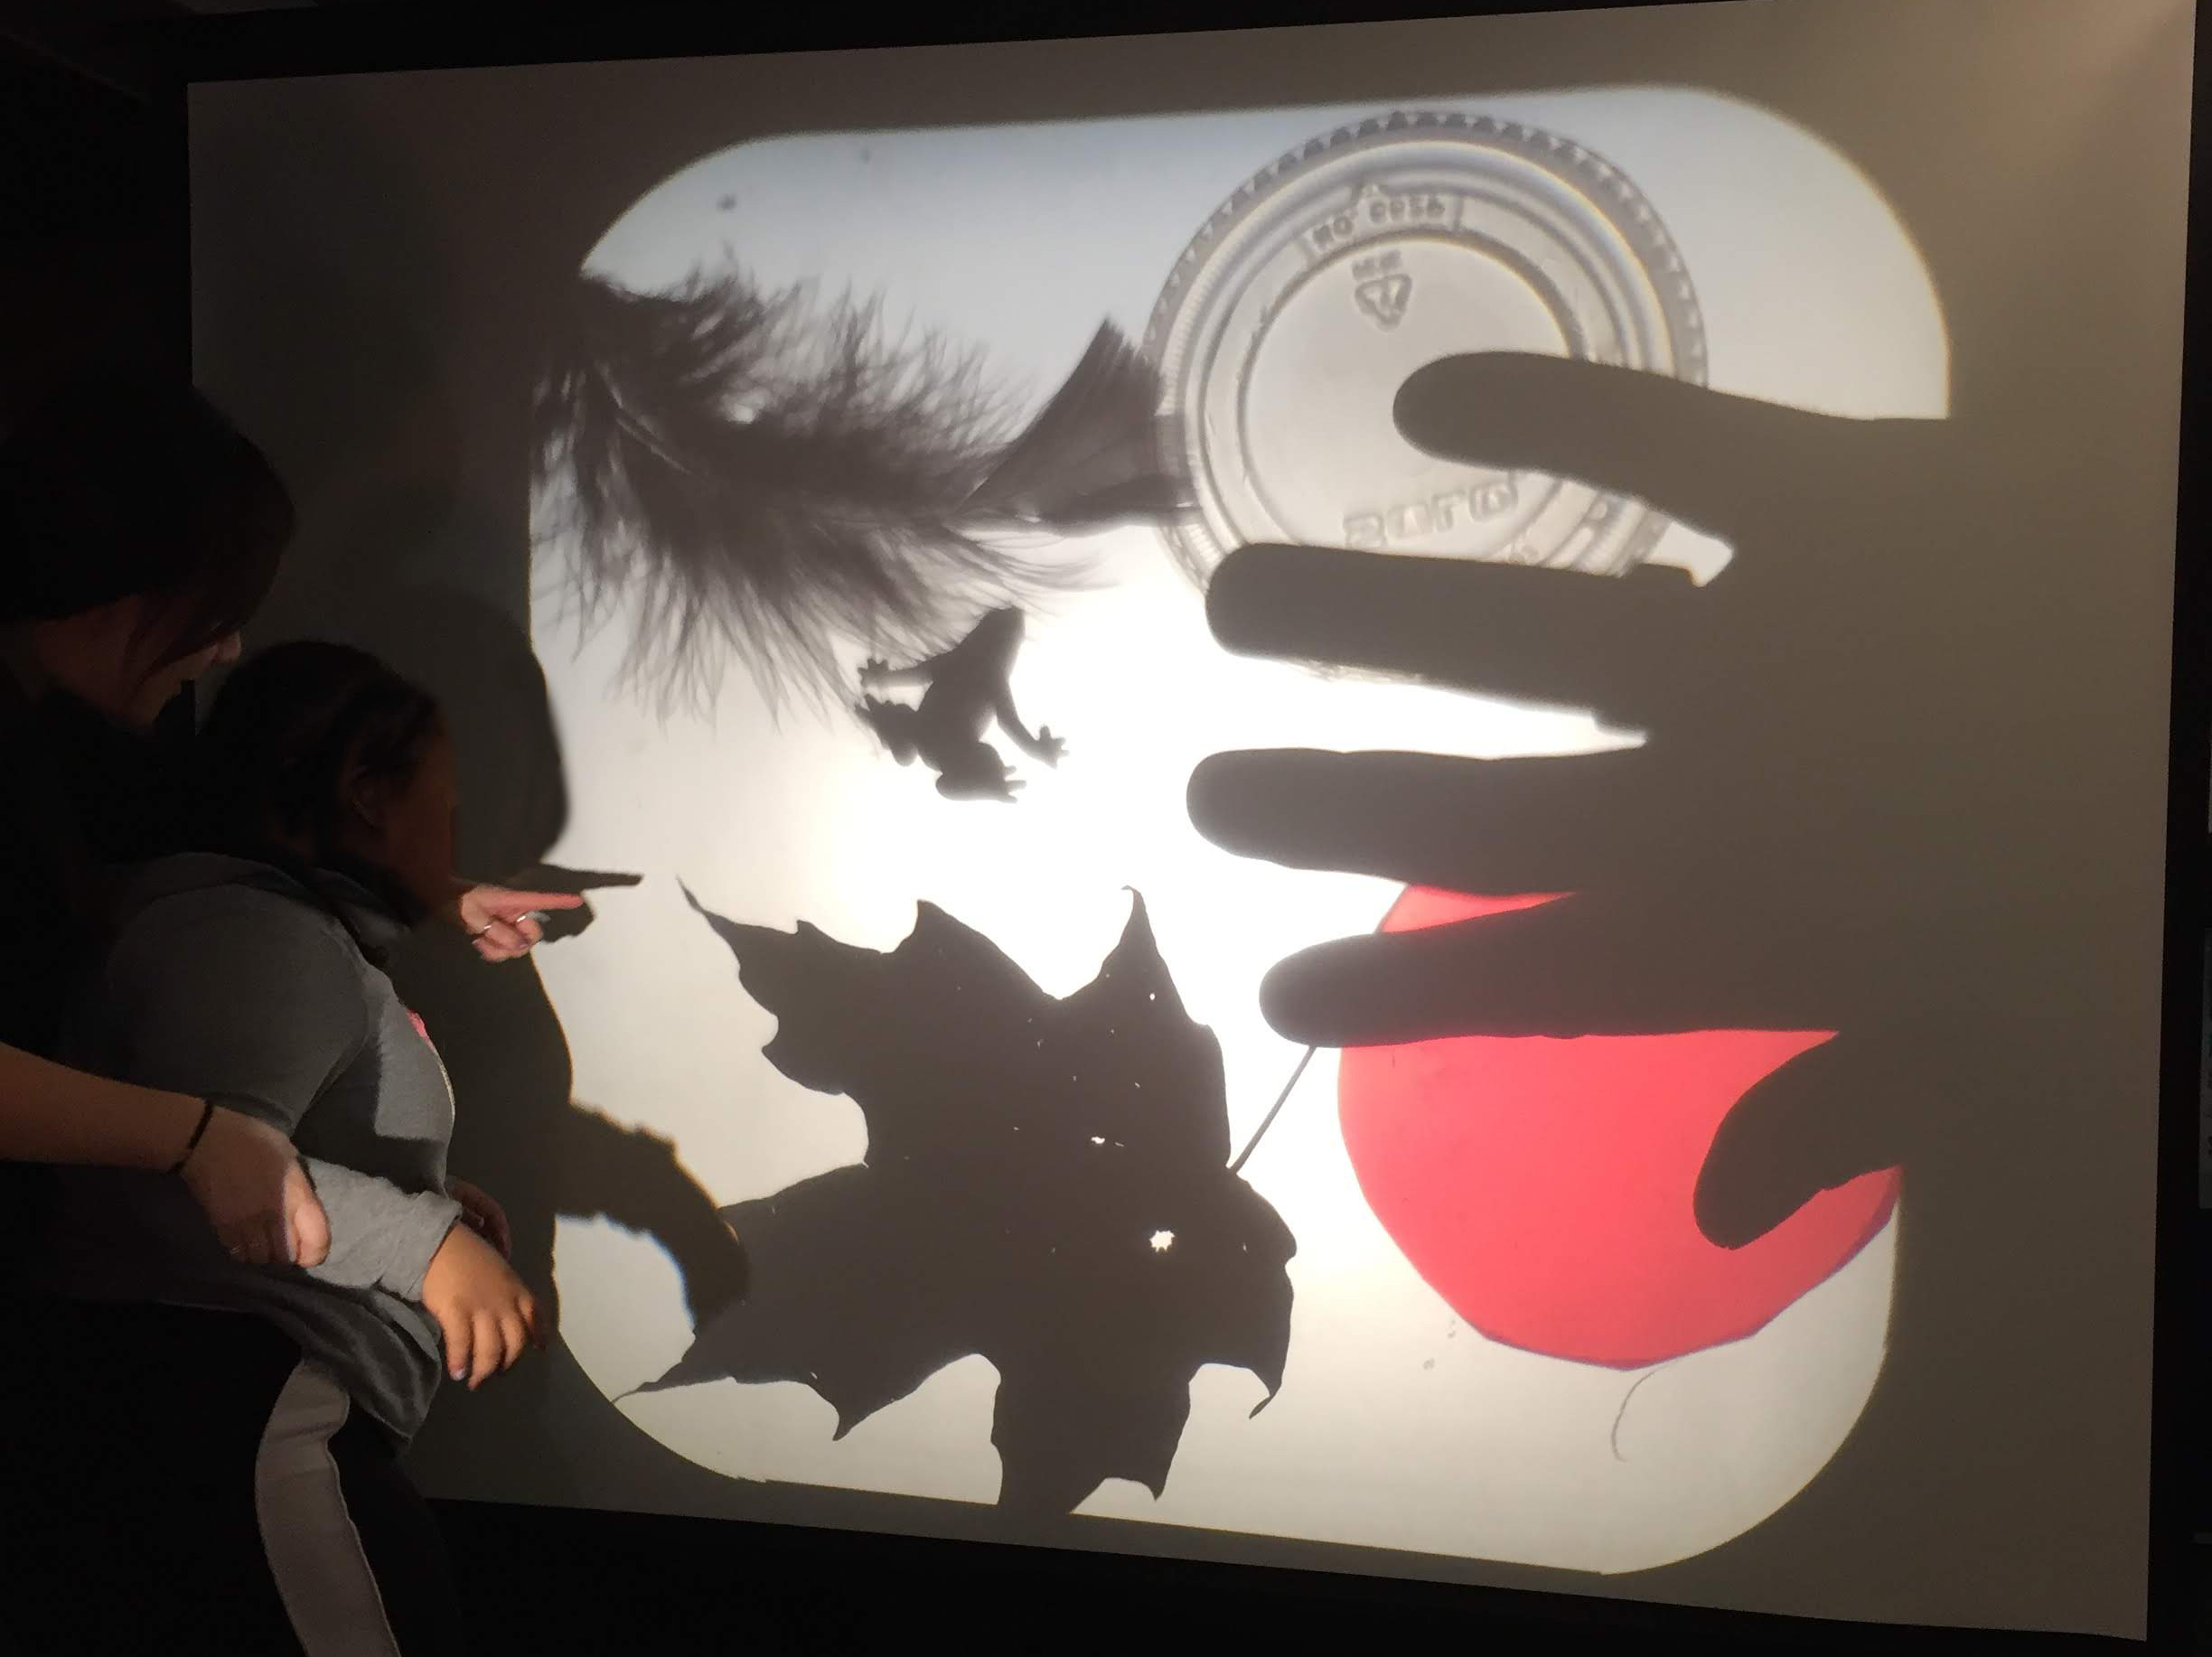 A photo showing an image projected on a wall with an overhead projector, containing the large shadows of a leaf, a frog, a feather, a plastic container lid and a hand. Two people stand to the side pointing at the projected image.